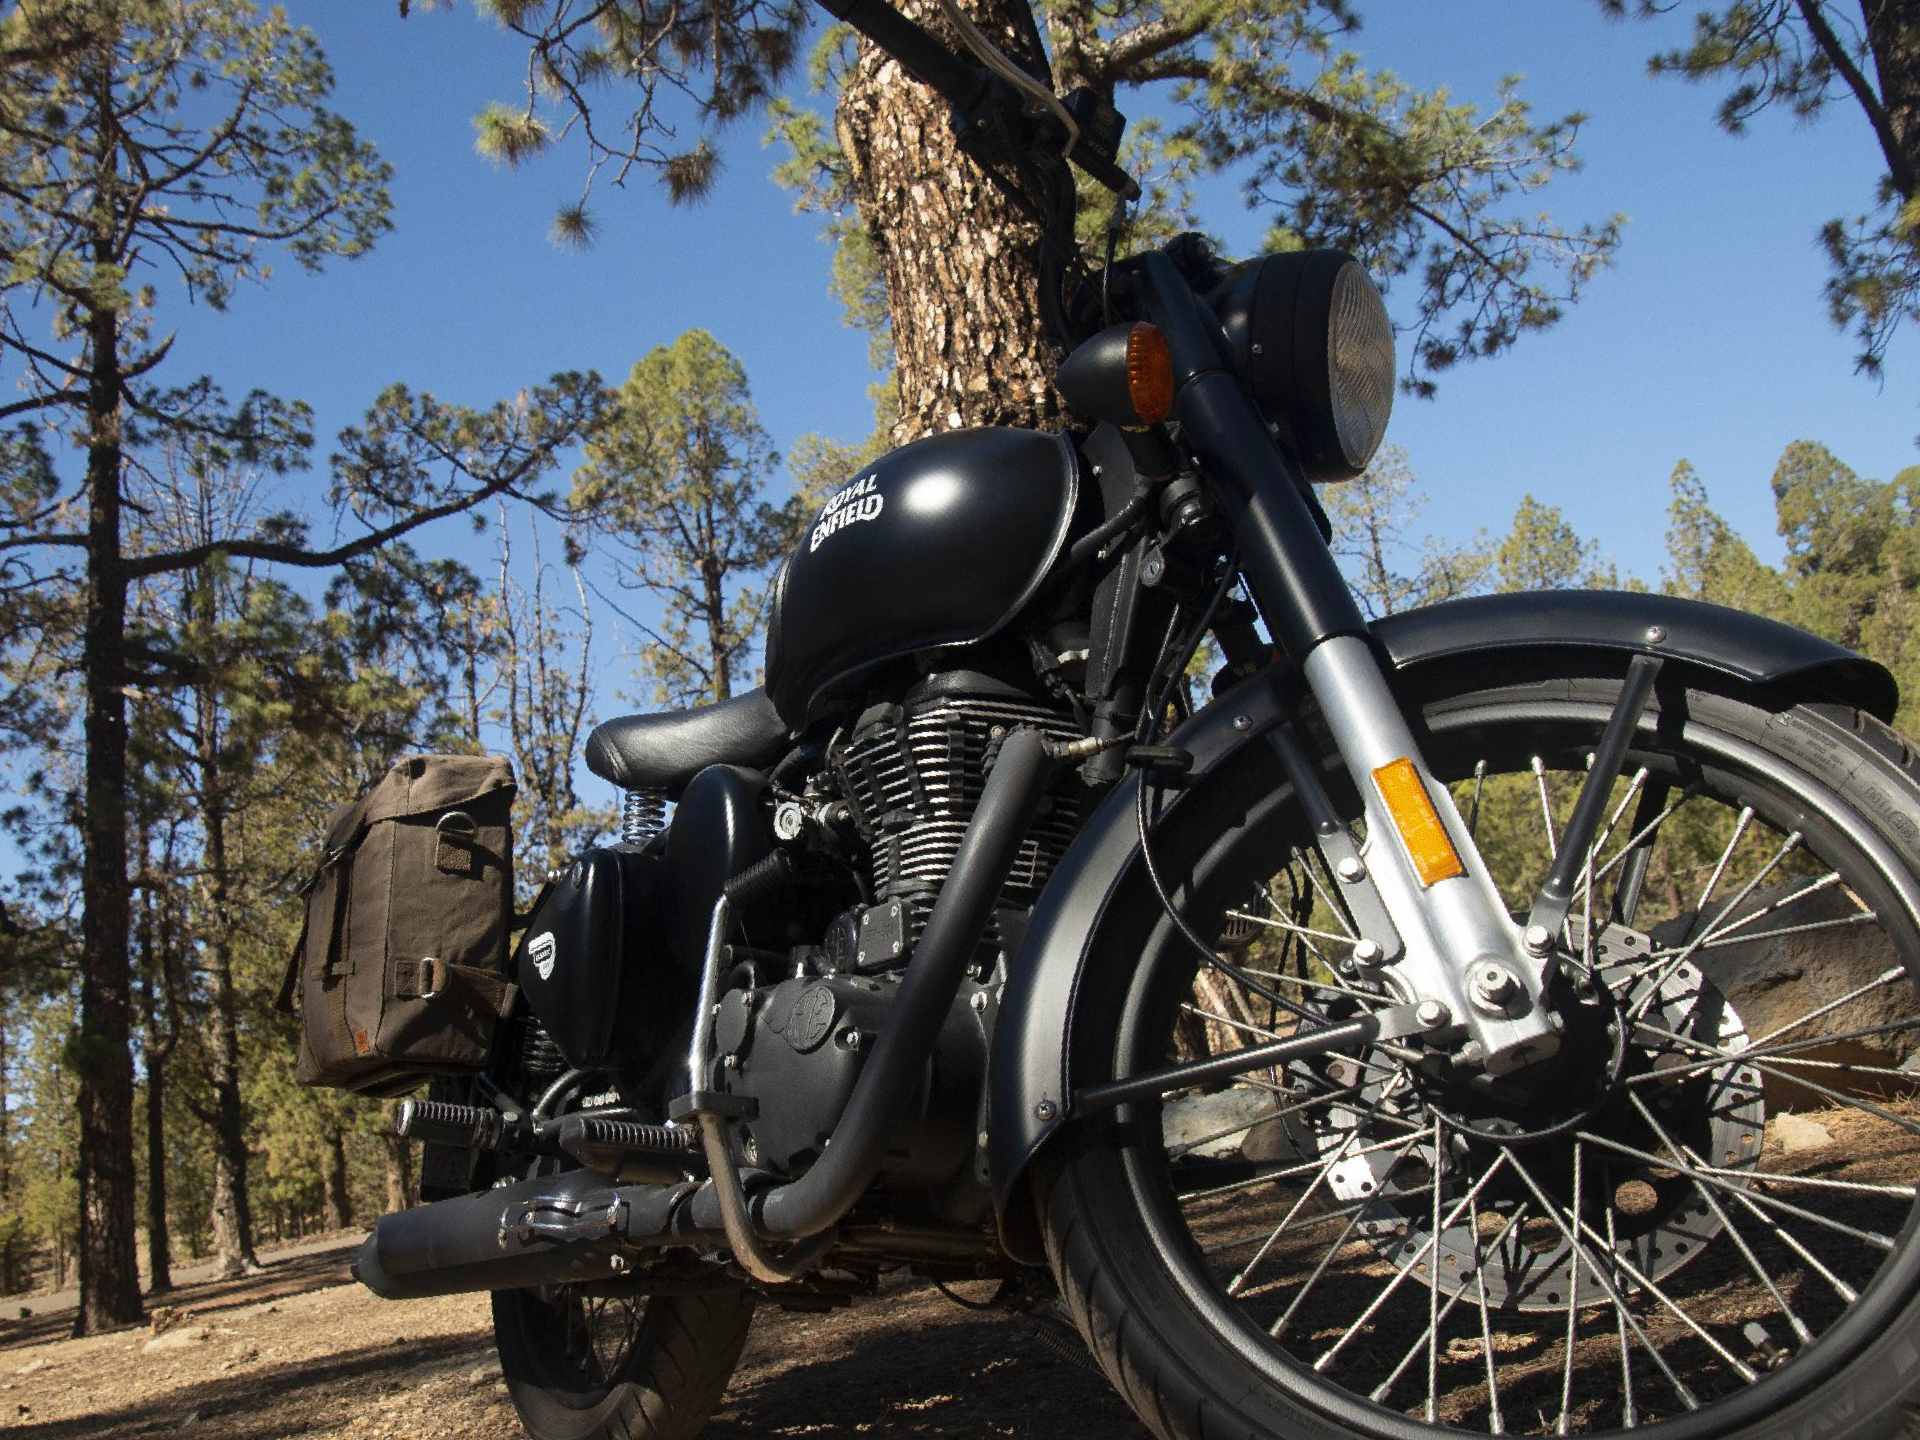 A black motorcycle is parked under a tree in the woods